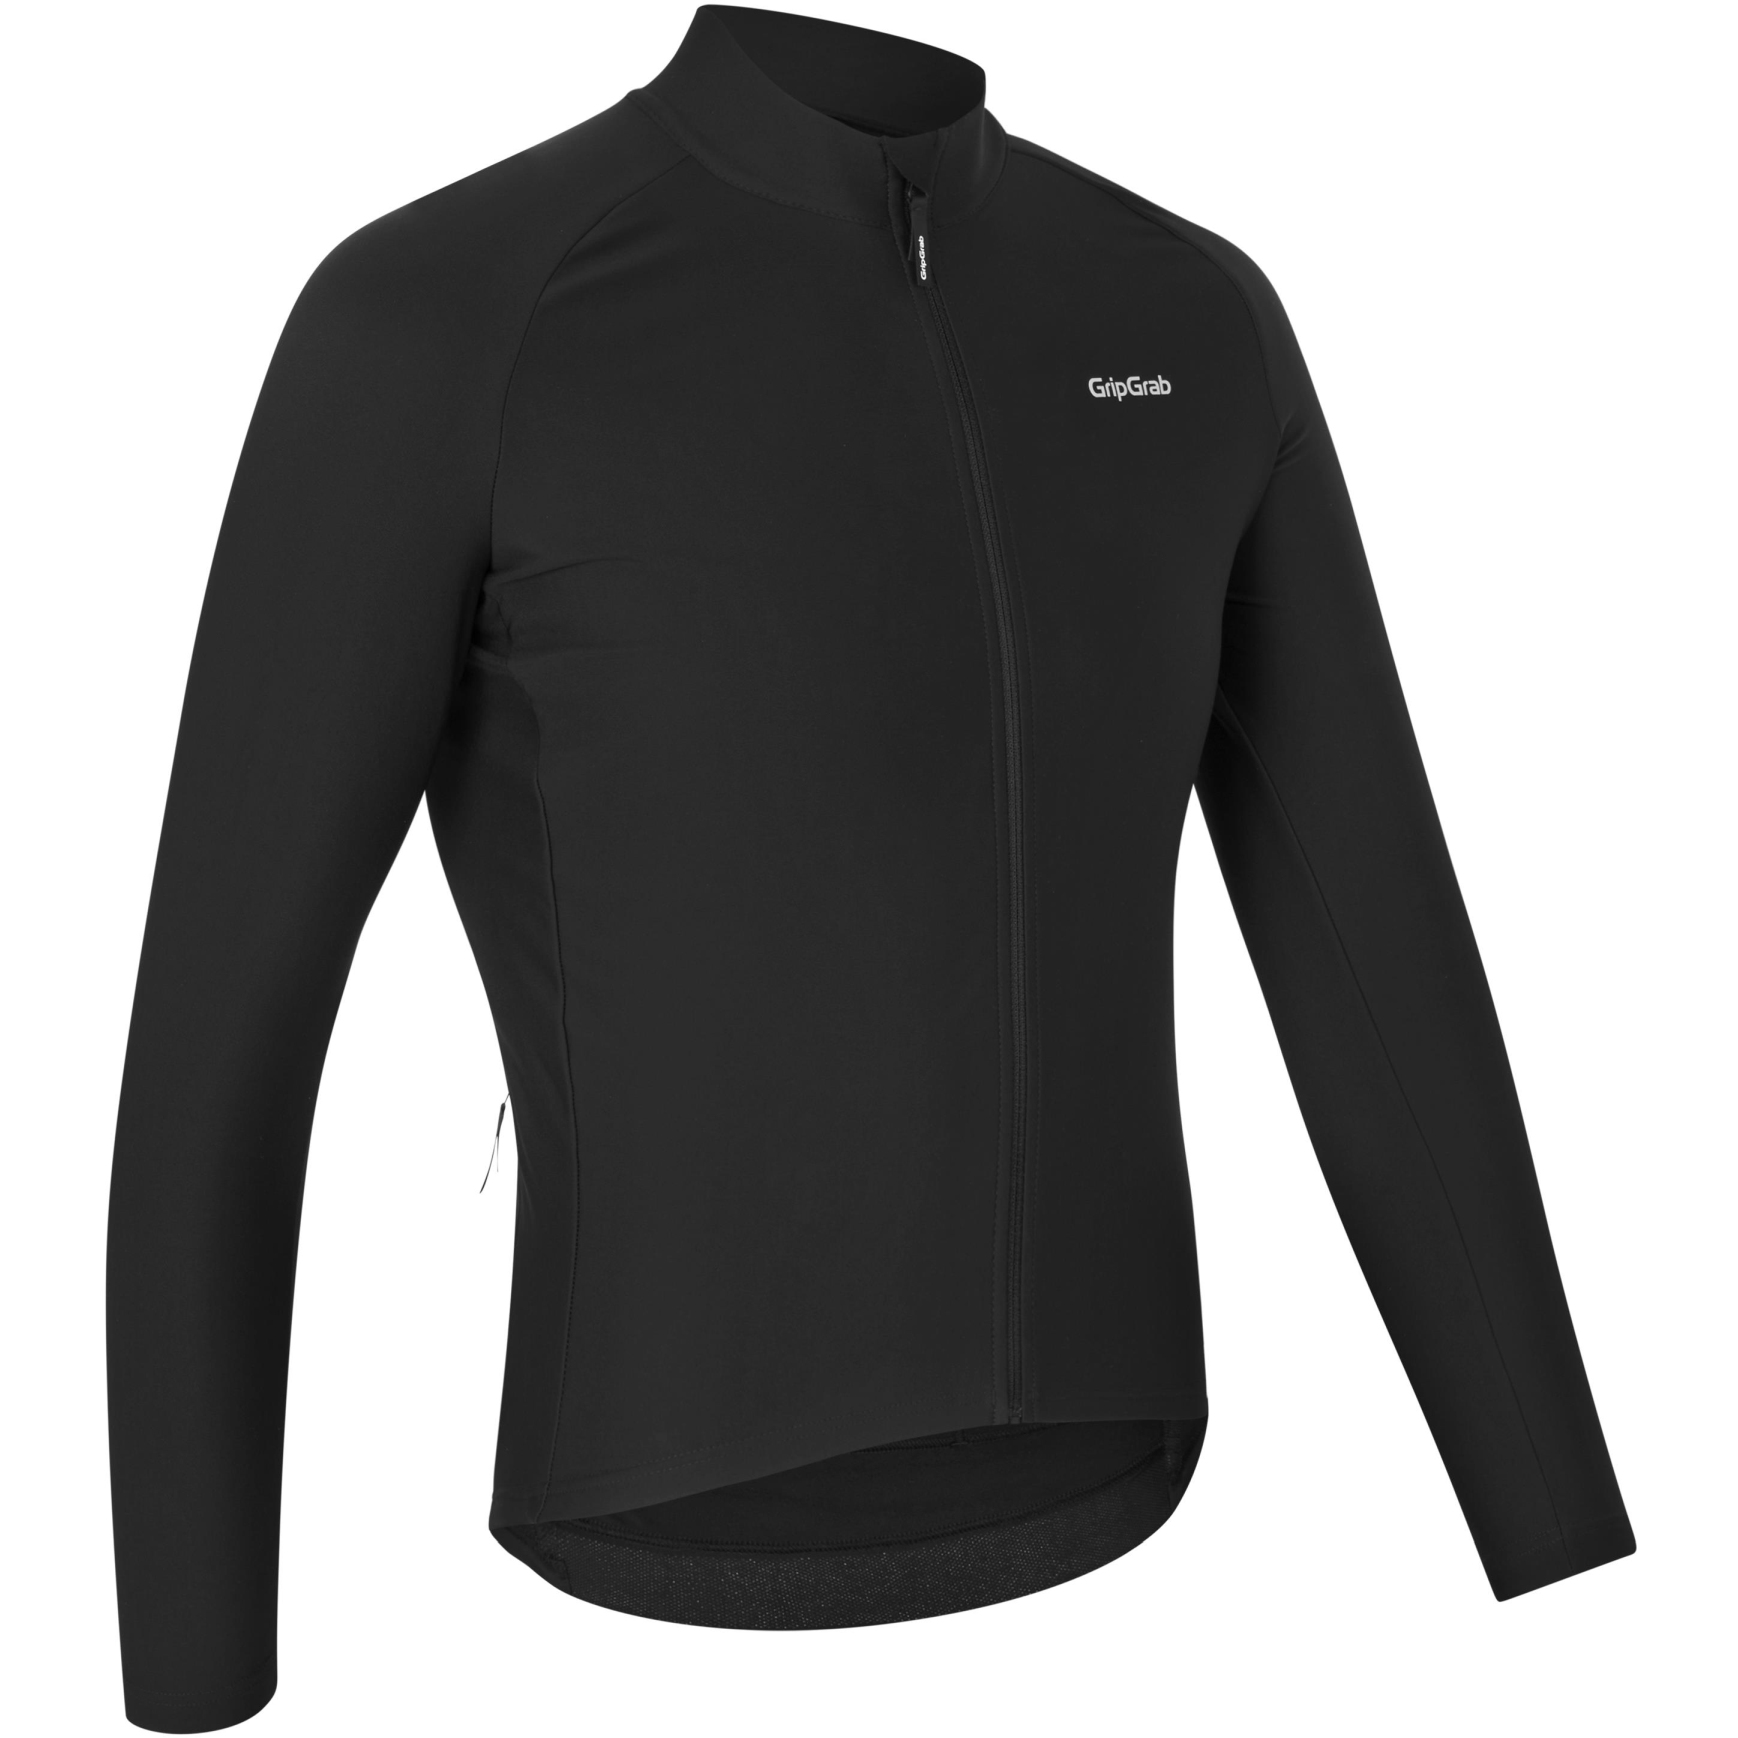 Picture of GripGrab ThermaPace Thermal Long Sleeve Jersey - black